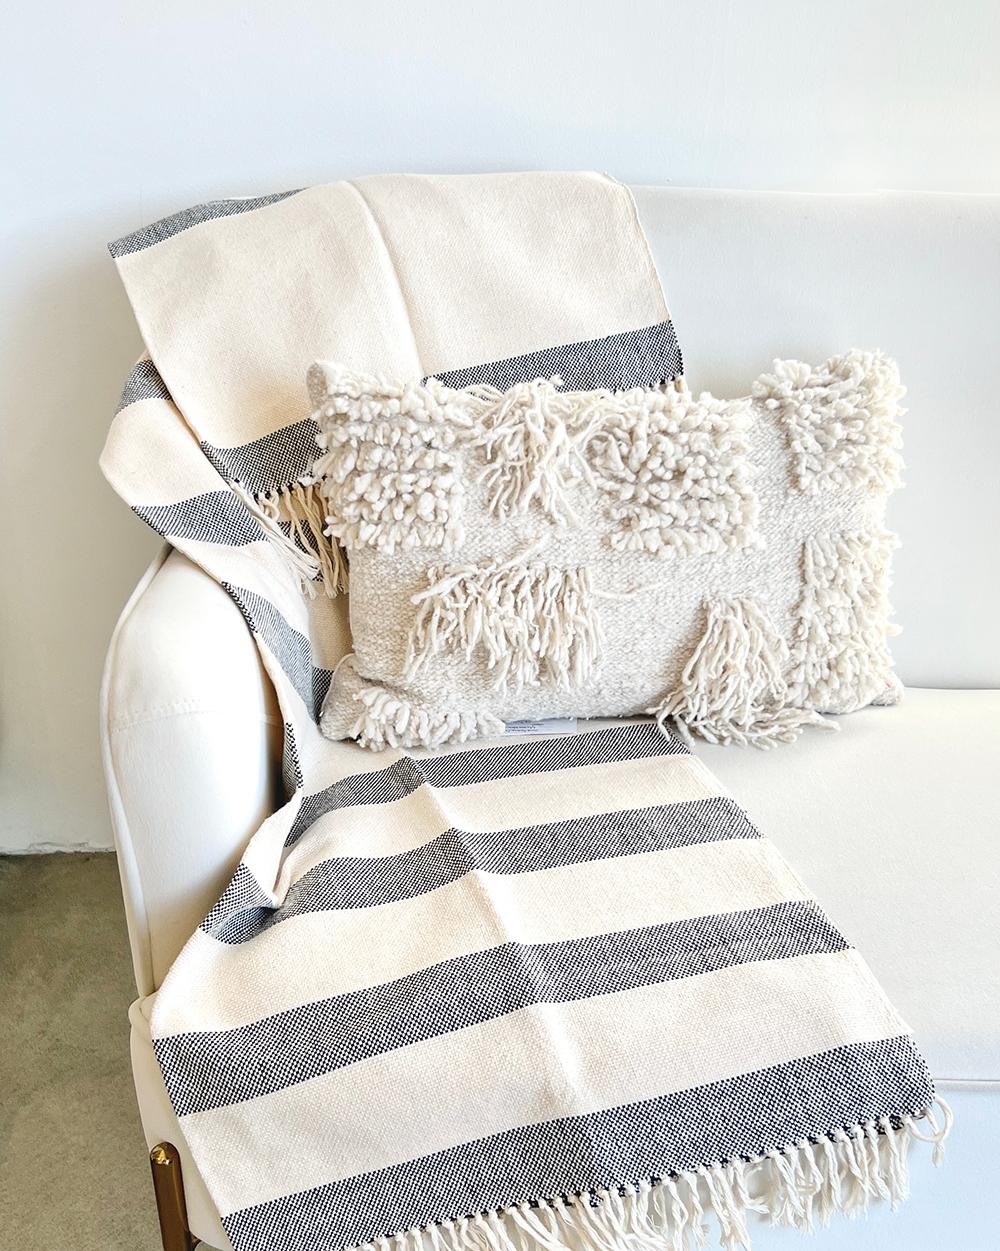 The perfect throw for your bedroom
This highly stylish and modern gradient stripe Amano throw is the perfect addition to any home. Crafted with a clean, crisp white and navy striped pattern, the fringe details offer a contemporary look. Handmade